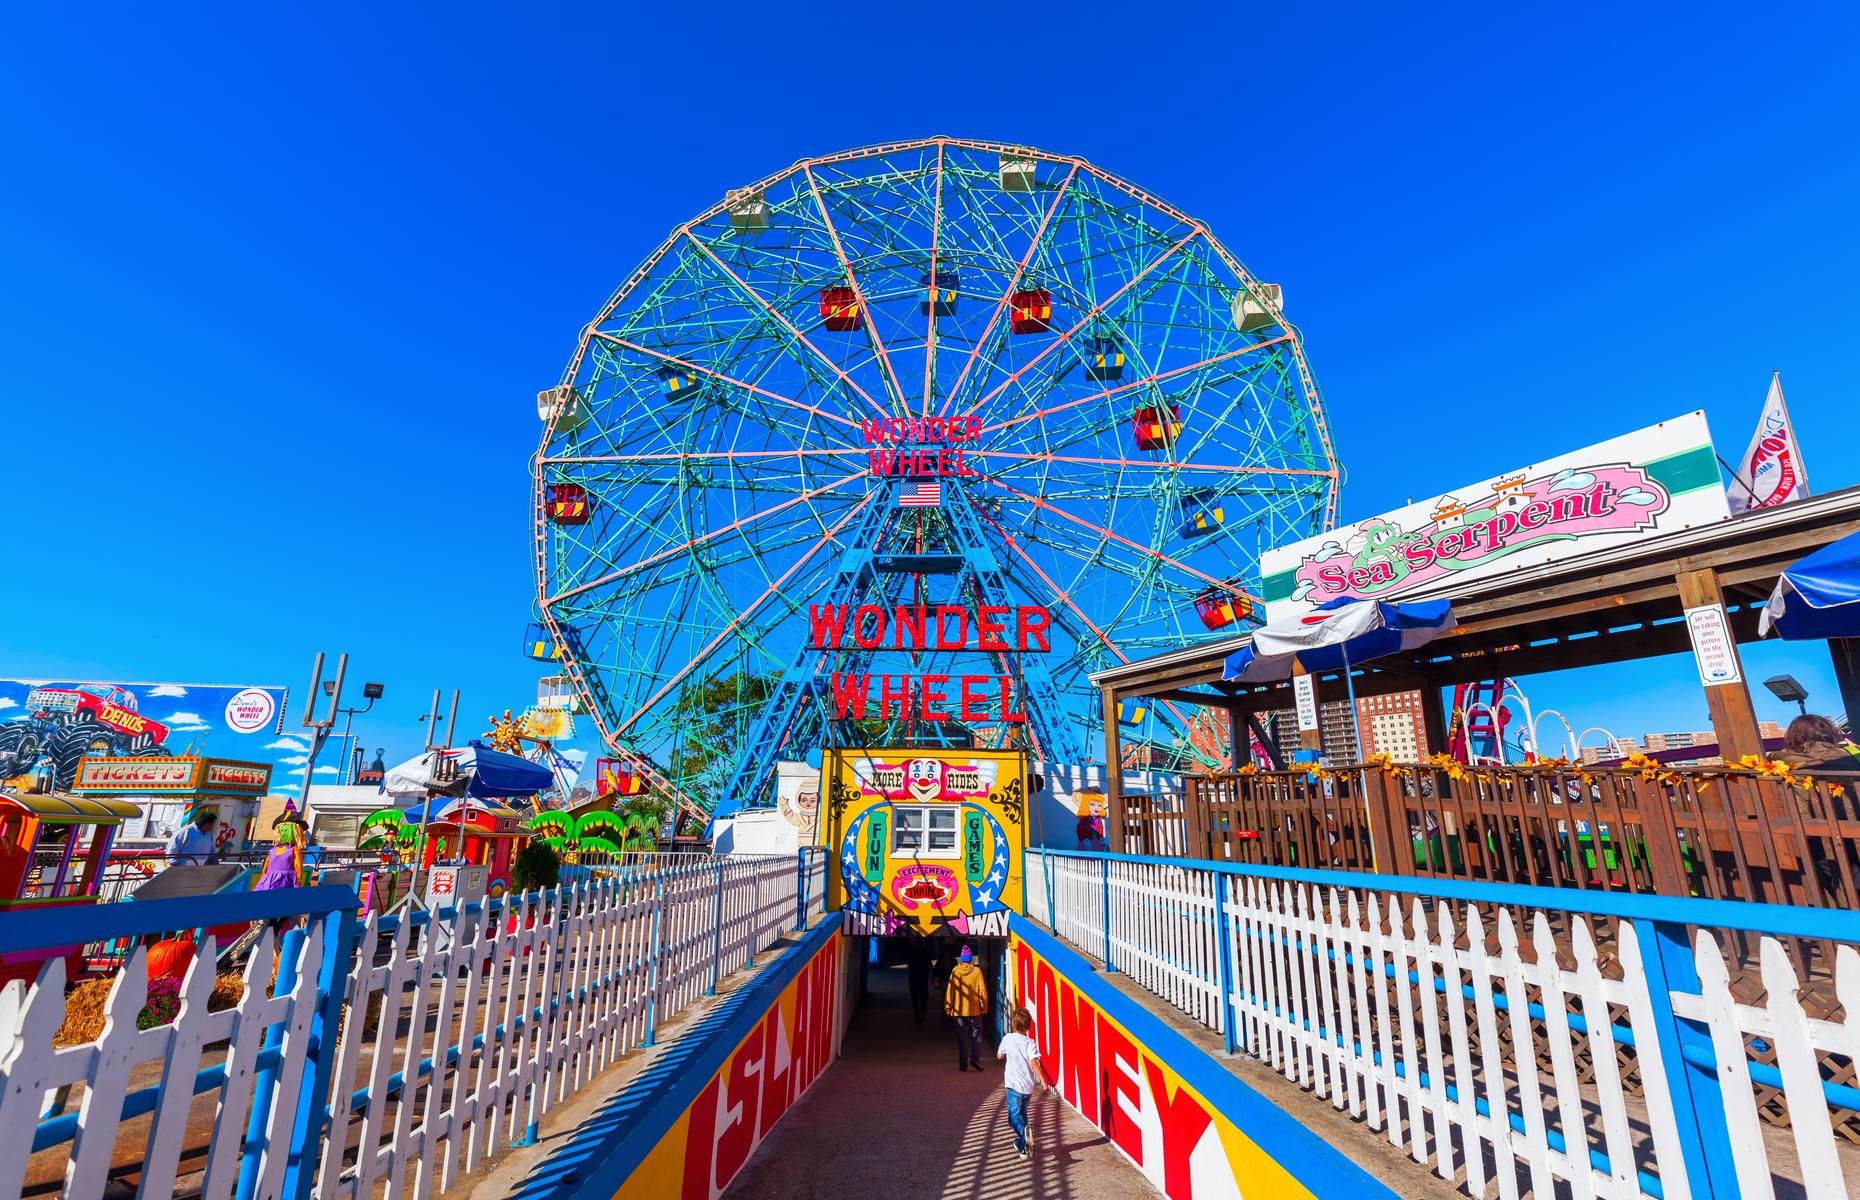 <p>Dig out your retro swimwear and roll up your towel. This crowded yet charming <a href="https://www.nycgo.com/attractions/coney-island">Brooklyn neighborhood</a> is really more like a beach resort and one that’s changed little since the 1950s. Candy floss on the boardwalk, arcades filled with vintage games, amusement park rides and people splashing in the waves – it’s a refreshing escape from hot New York summers.</p>  <p><strong><a href="https://www.loveexploring.com/galleries/84771/what-vacations-looked-like-in-every-decade-since-1900?page=1">Here's what vacations looked like in every decade since 1900</a></strong></p>